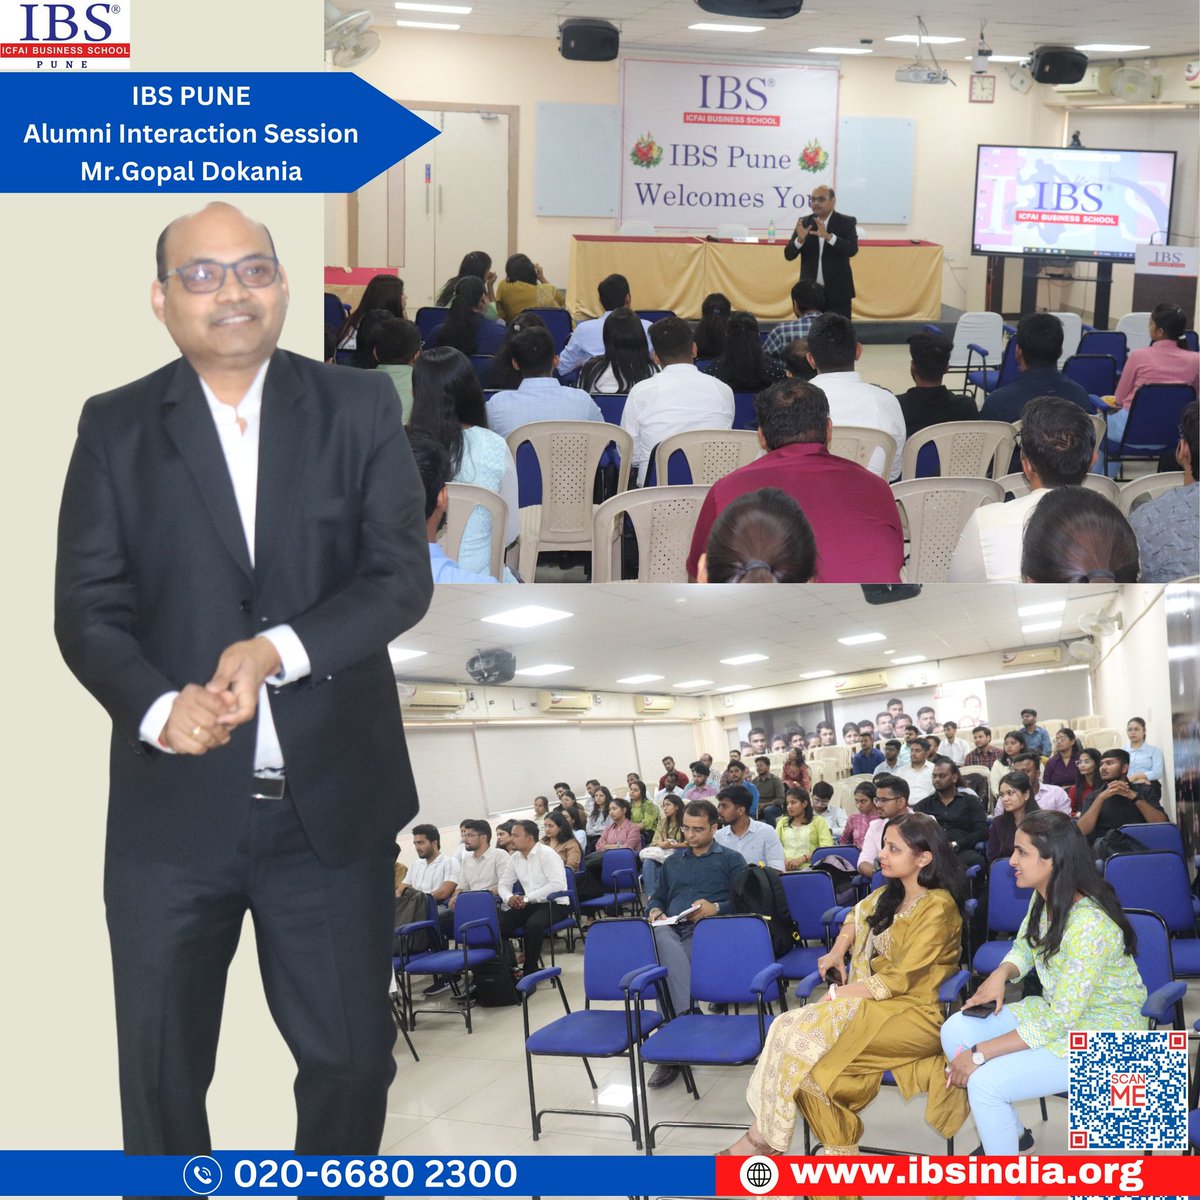 An insightful “Experience Sharing” session by Mr. Gopal Dokania at IBS Pune.

#IBS #IBSPUNE #MBA #PGDM